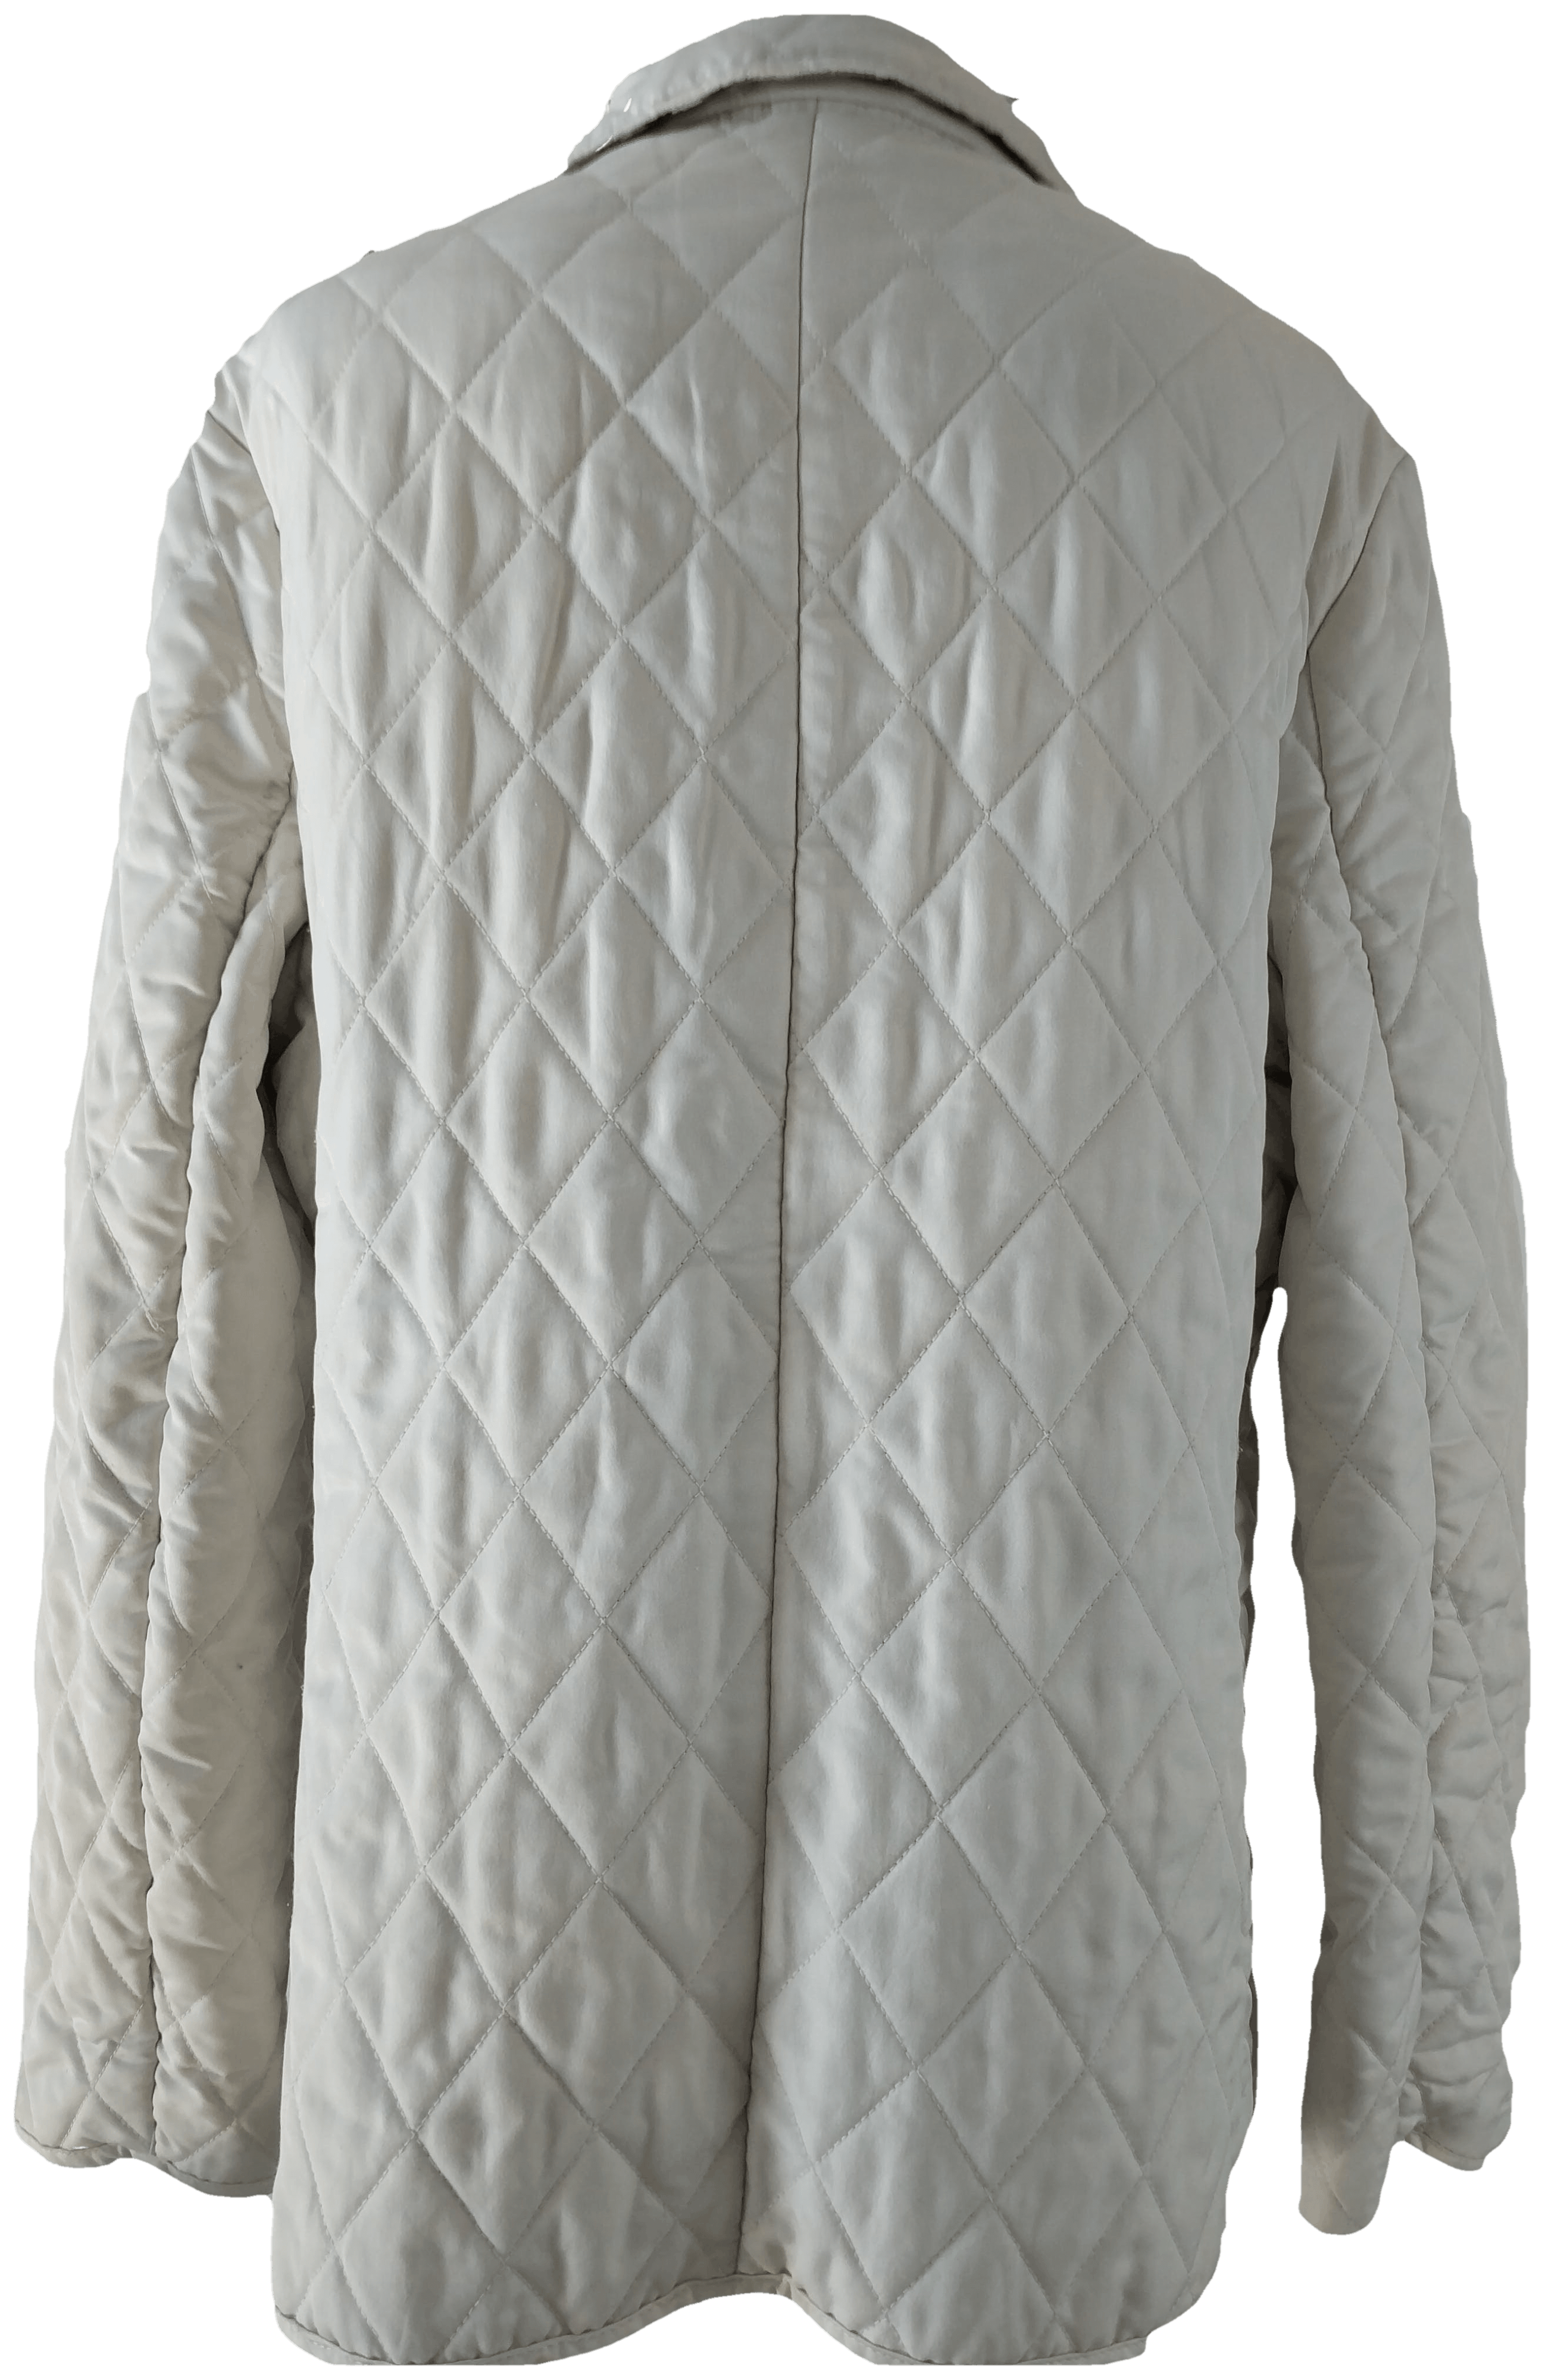 burberry white quilted jacket